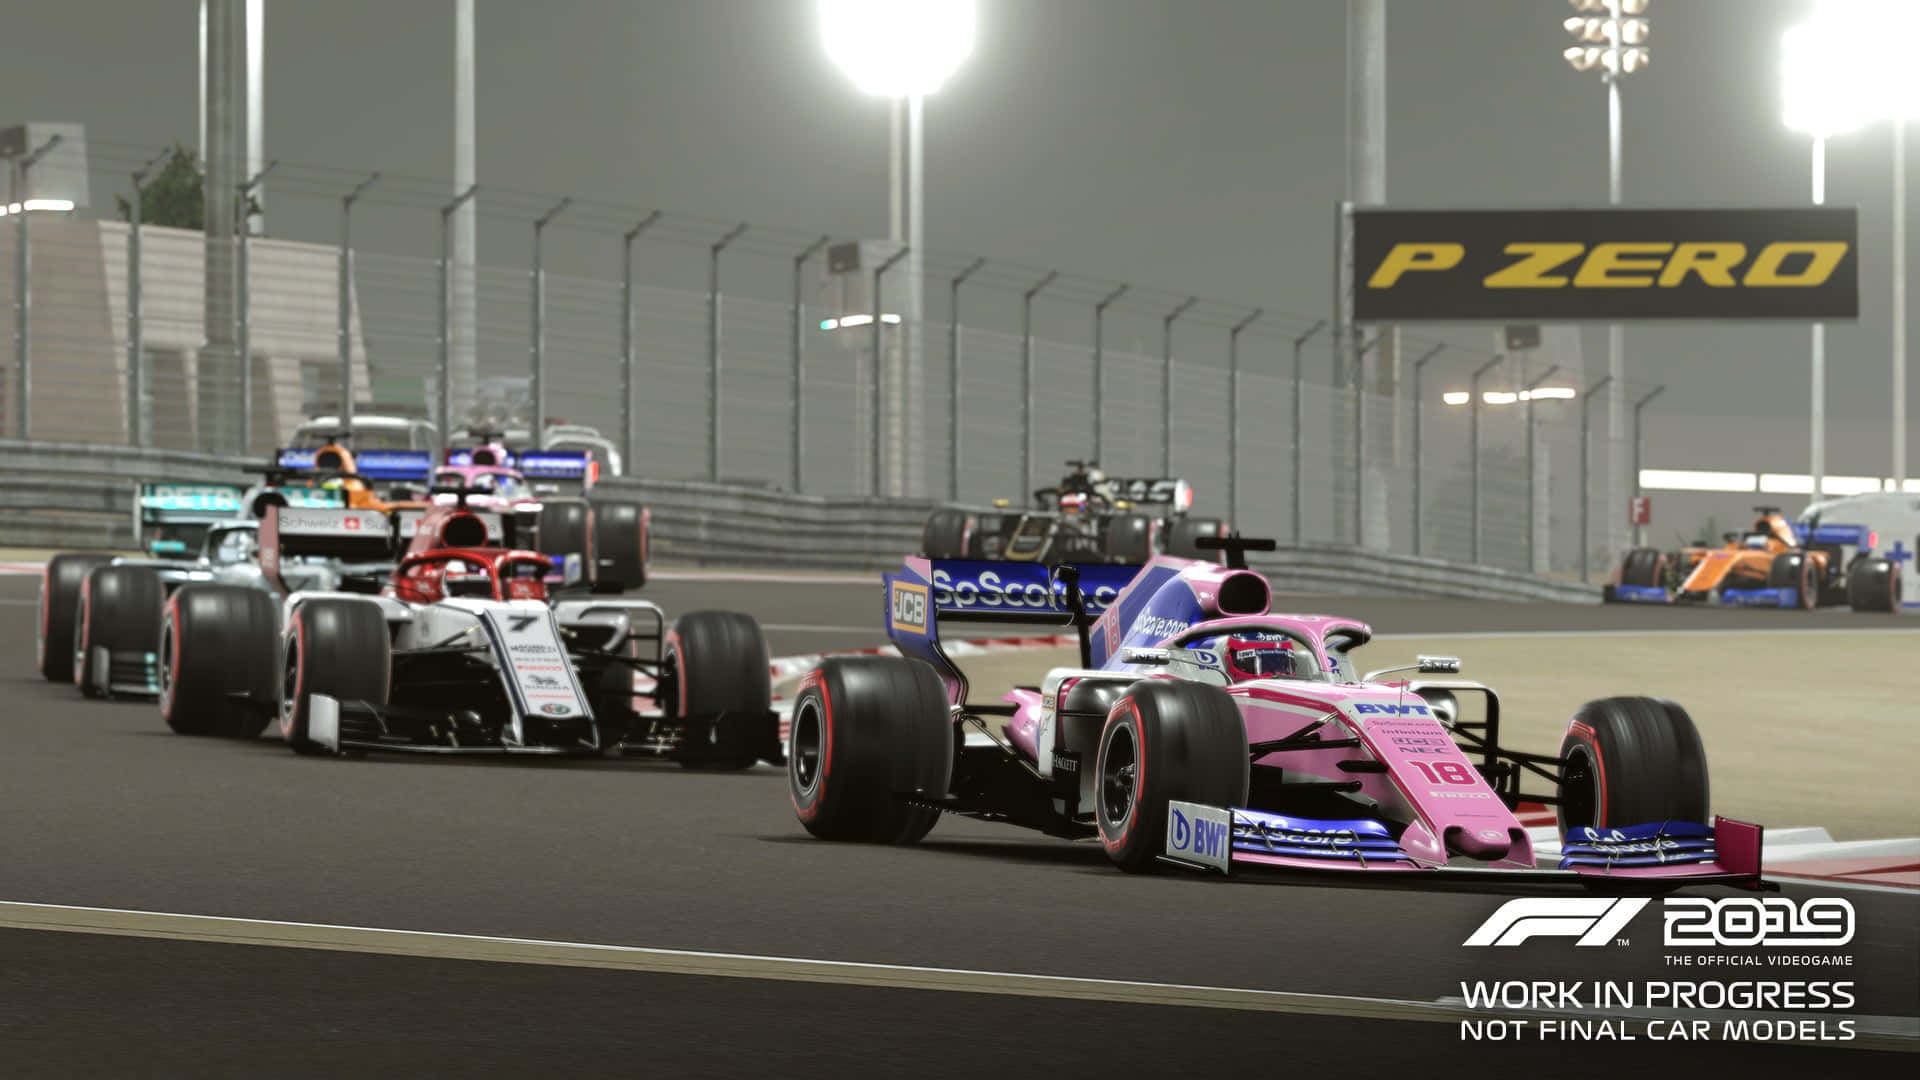 Excitement of High-Speed Racing comes to Life with HD F1 2019